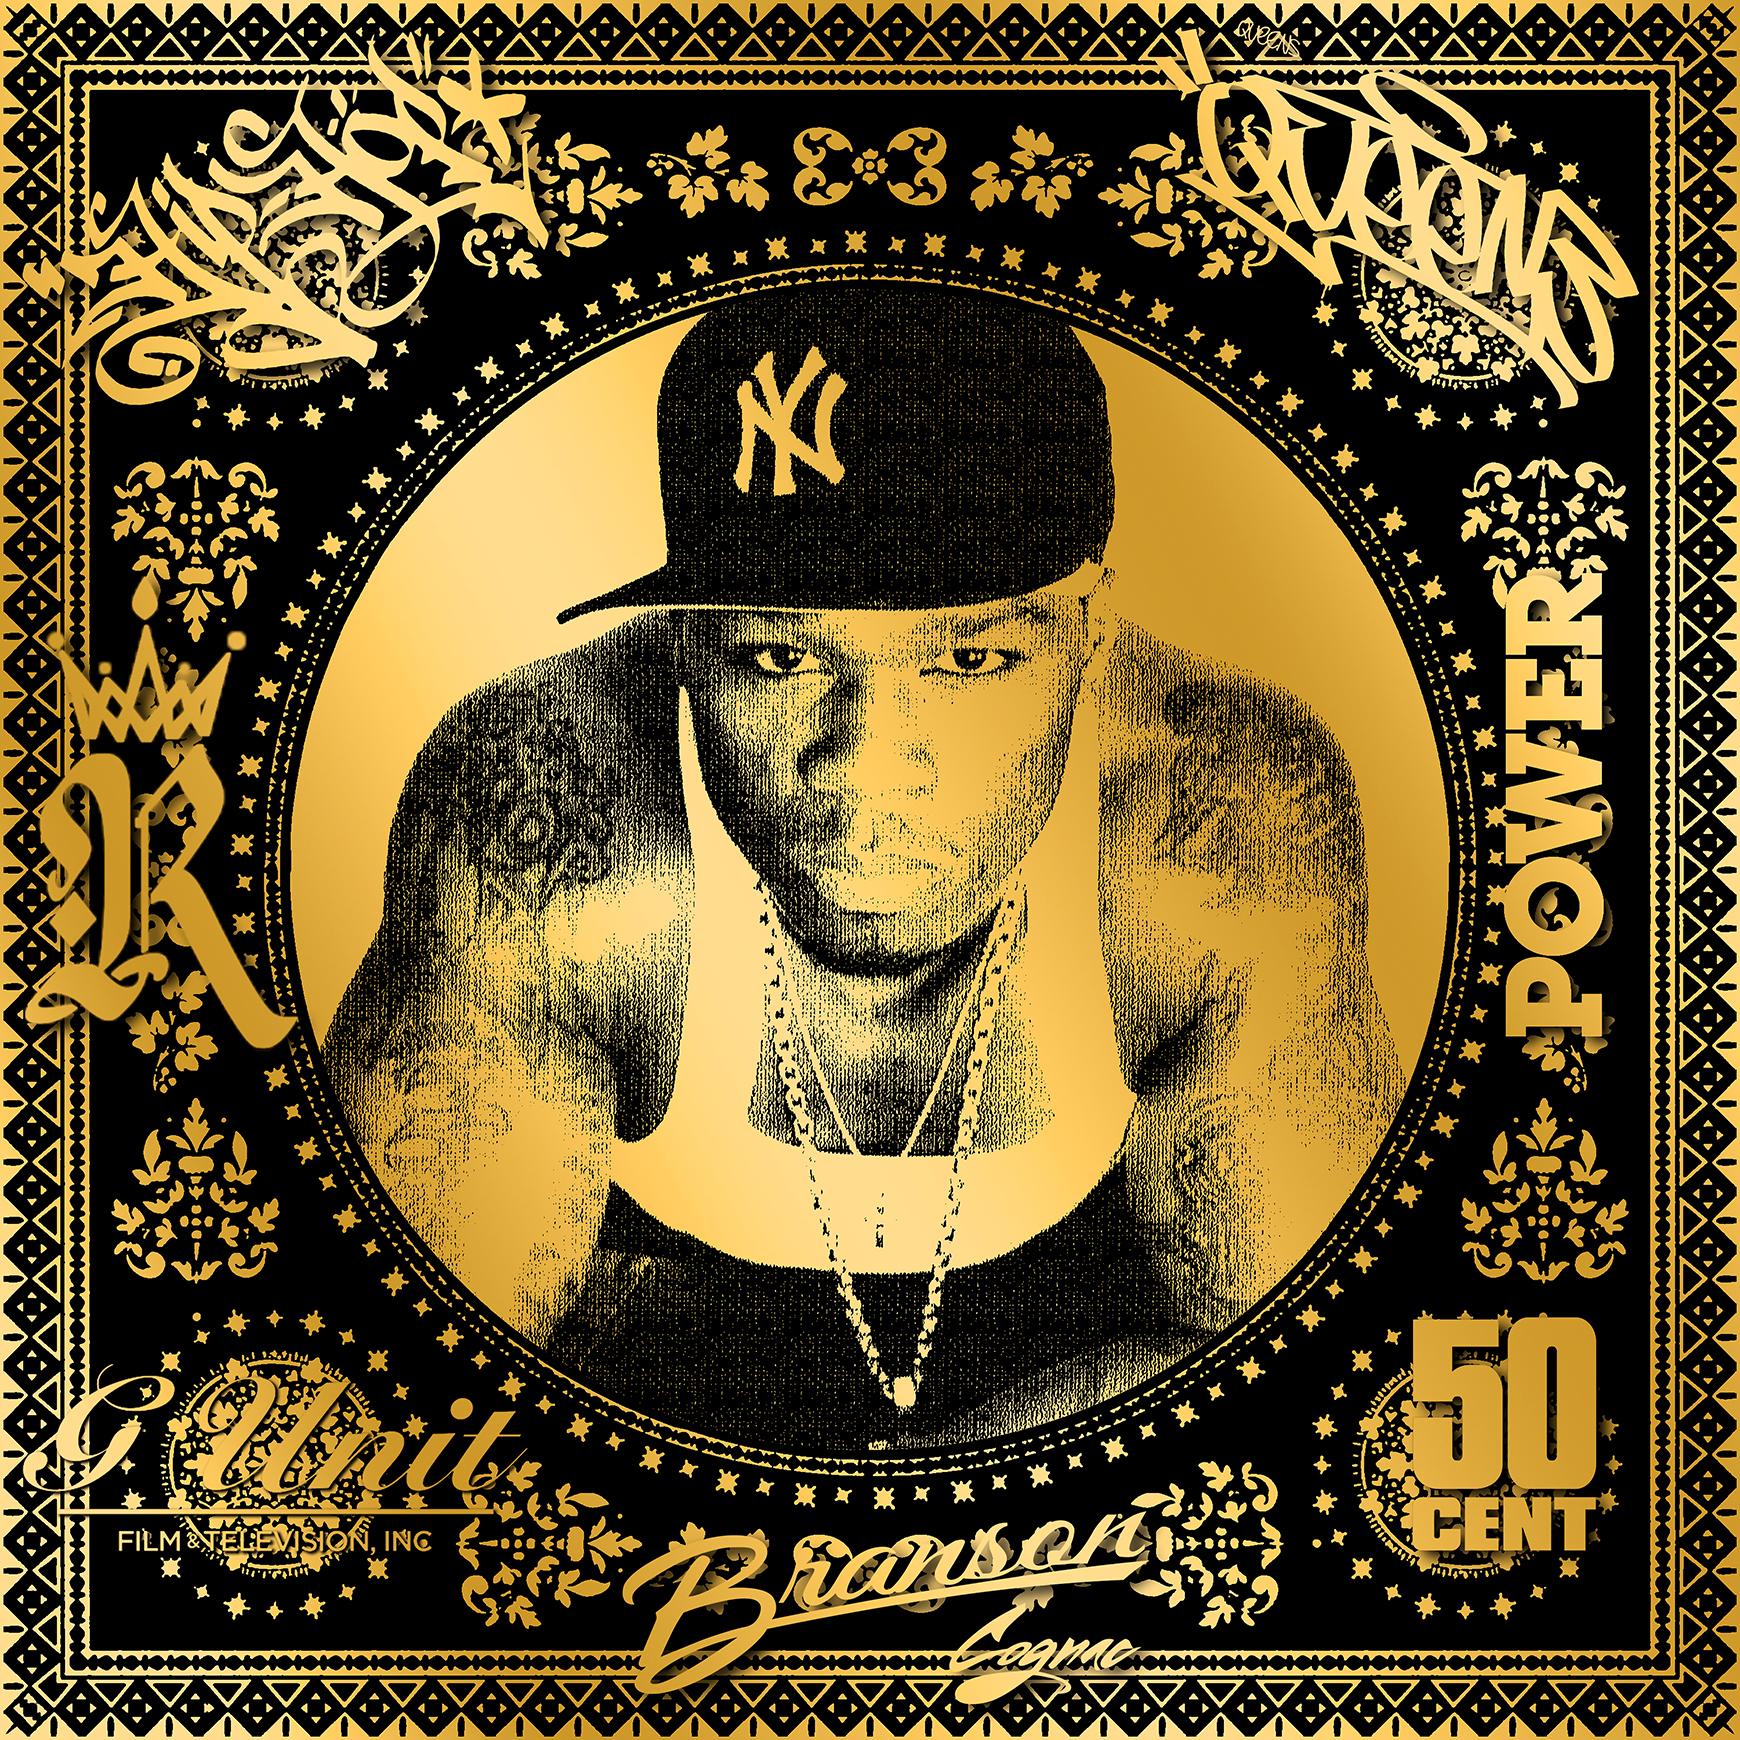 50 Cent (Gold) (50 Years, Hip Hop, Rap, Iconic, Artist, Musician, Rapper) - Print by Agent X